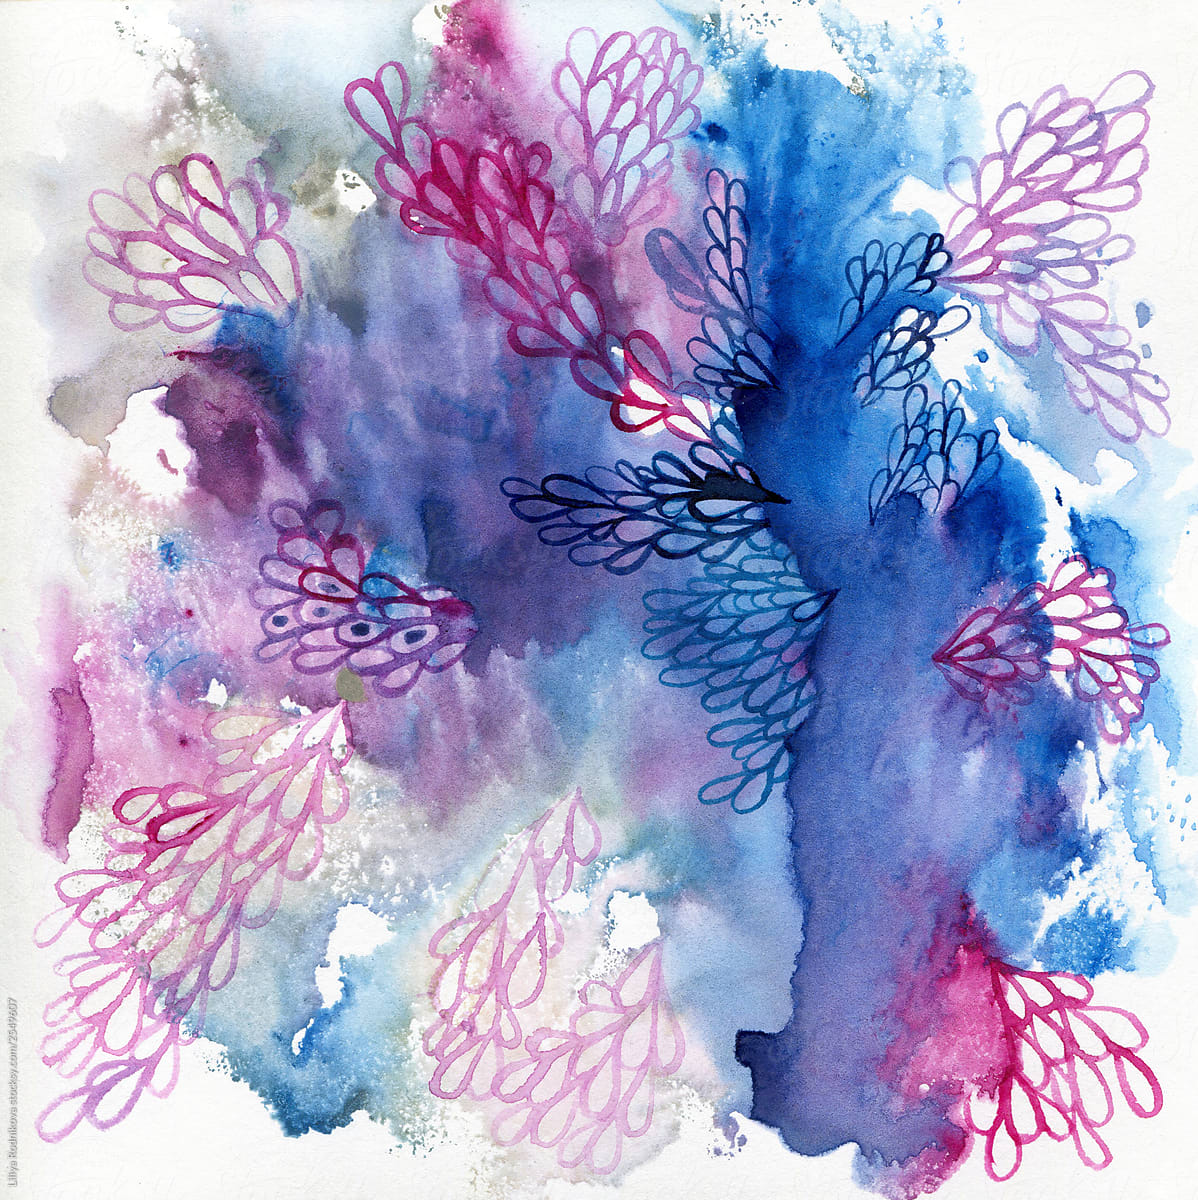 Abstract watercolor texture in blue and pink colors